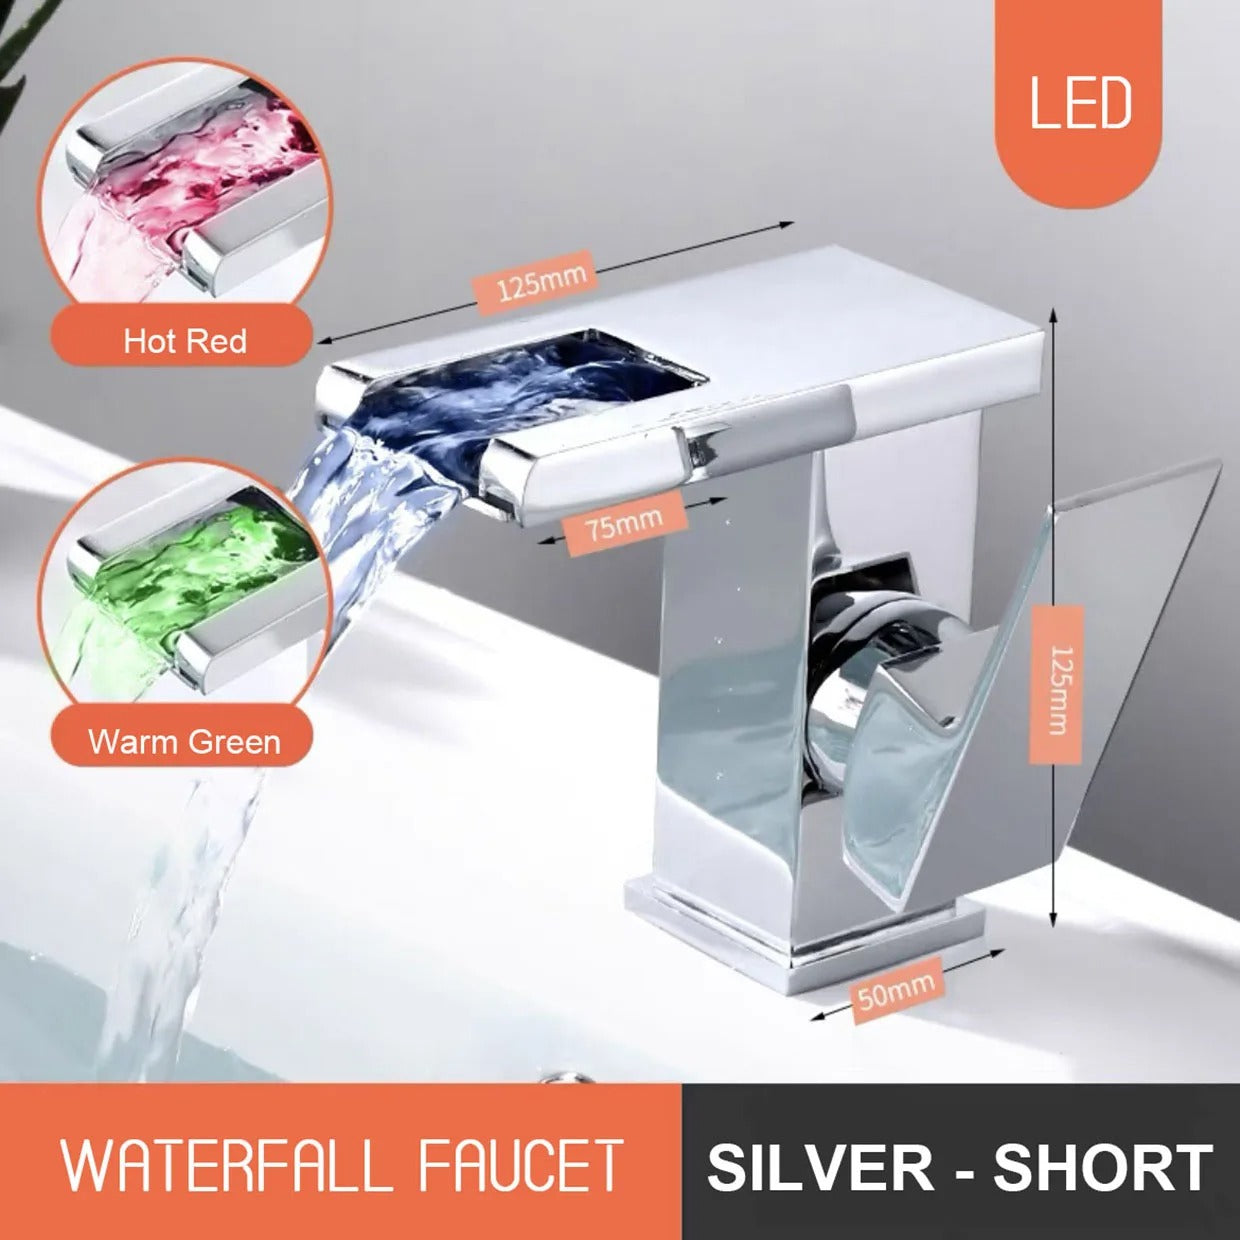 LED Waterfall Faucet Hot Cold Color Changing Smart Luminous Mixer Tap Bathroom Wash